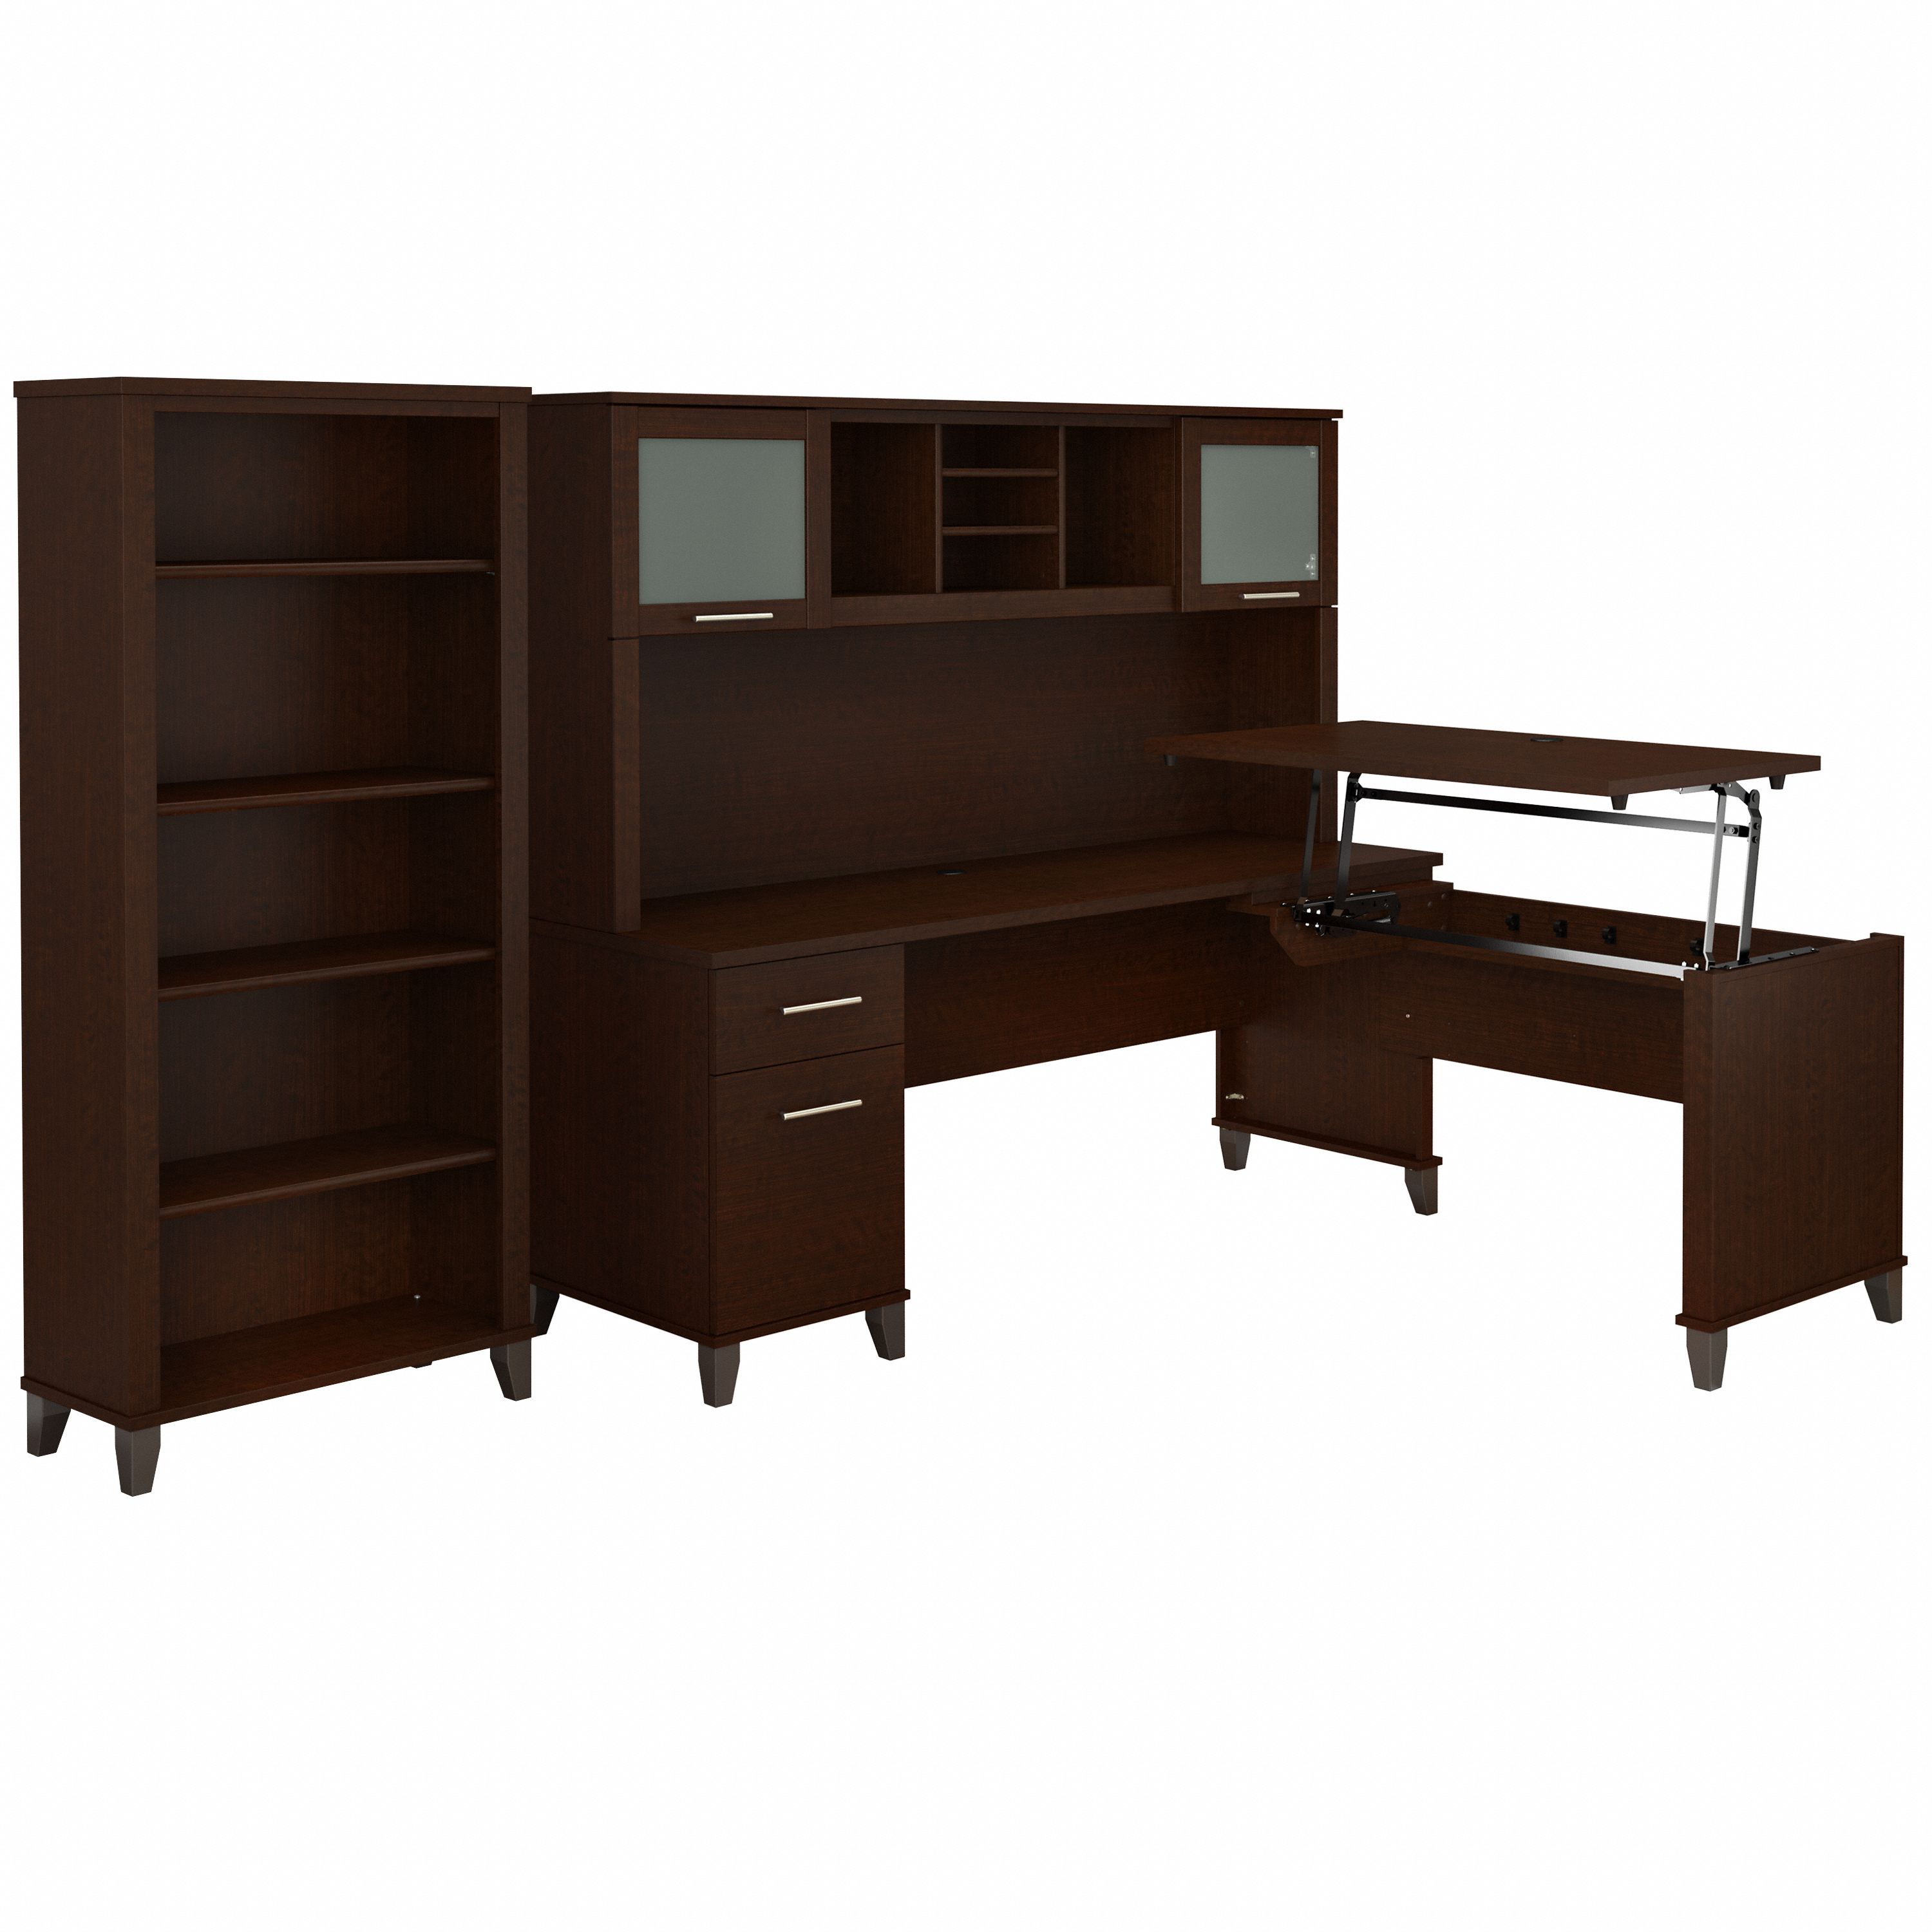 Shop Bush Furniture Somerset 72W 3 Position Sit to Stand L Shaped Desk with Hutch and Bookcase 02 SET017MR #color_mocha cherry